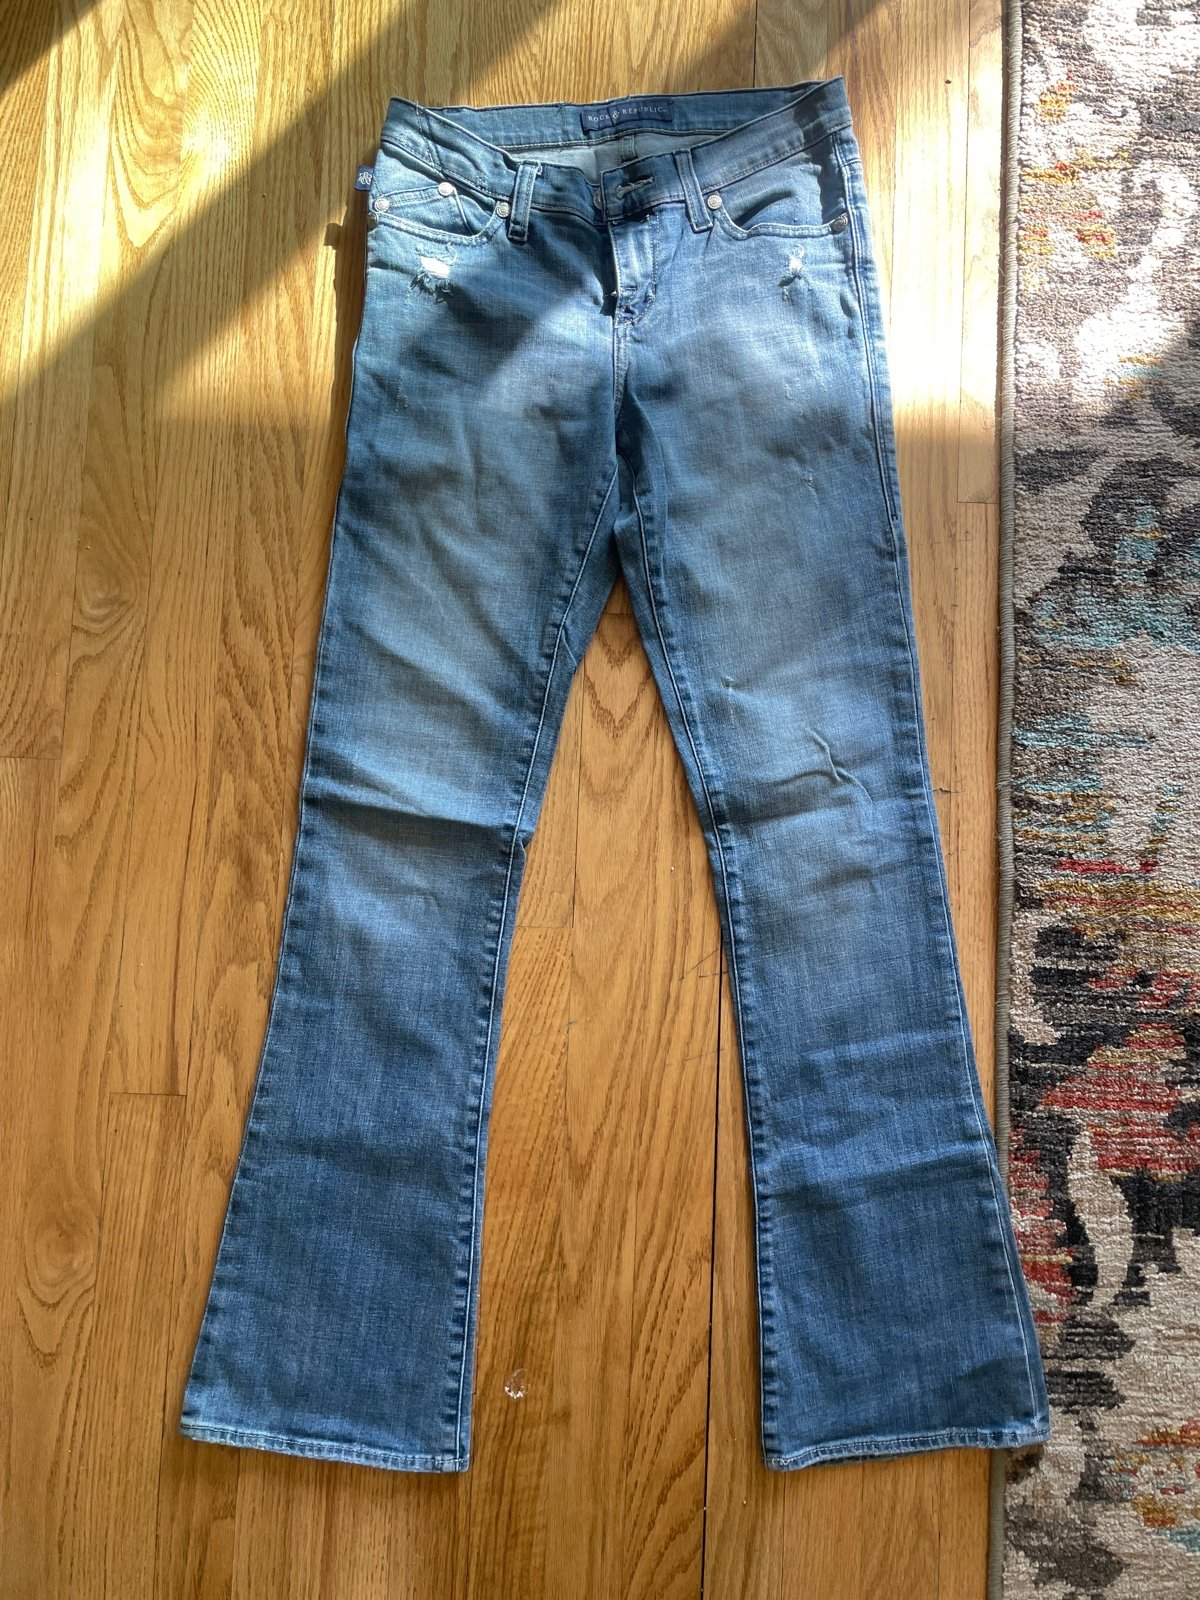 Classic Size 4 rock and republic jeans hR7b85ZSC US Sale